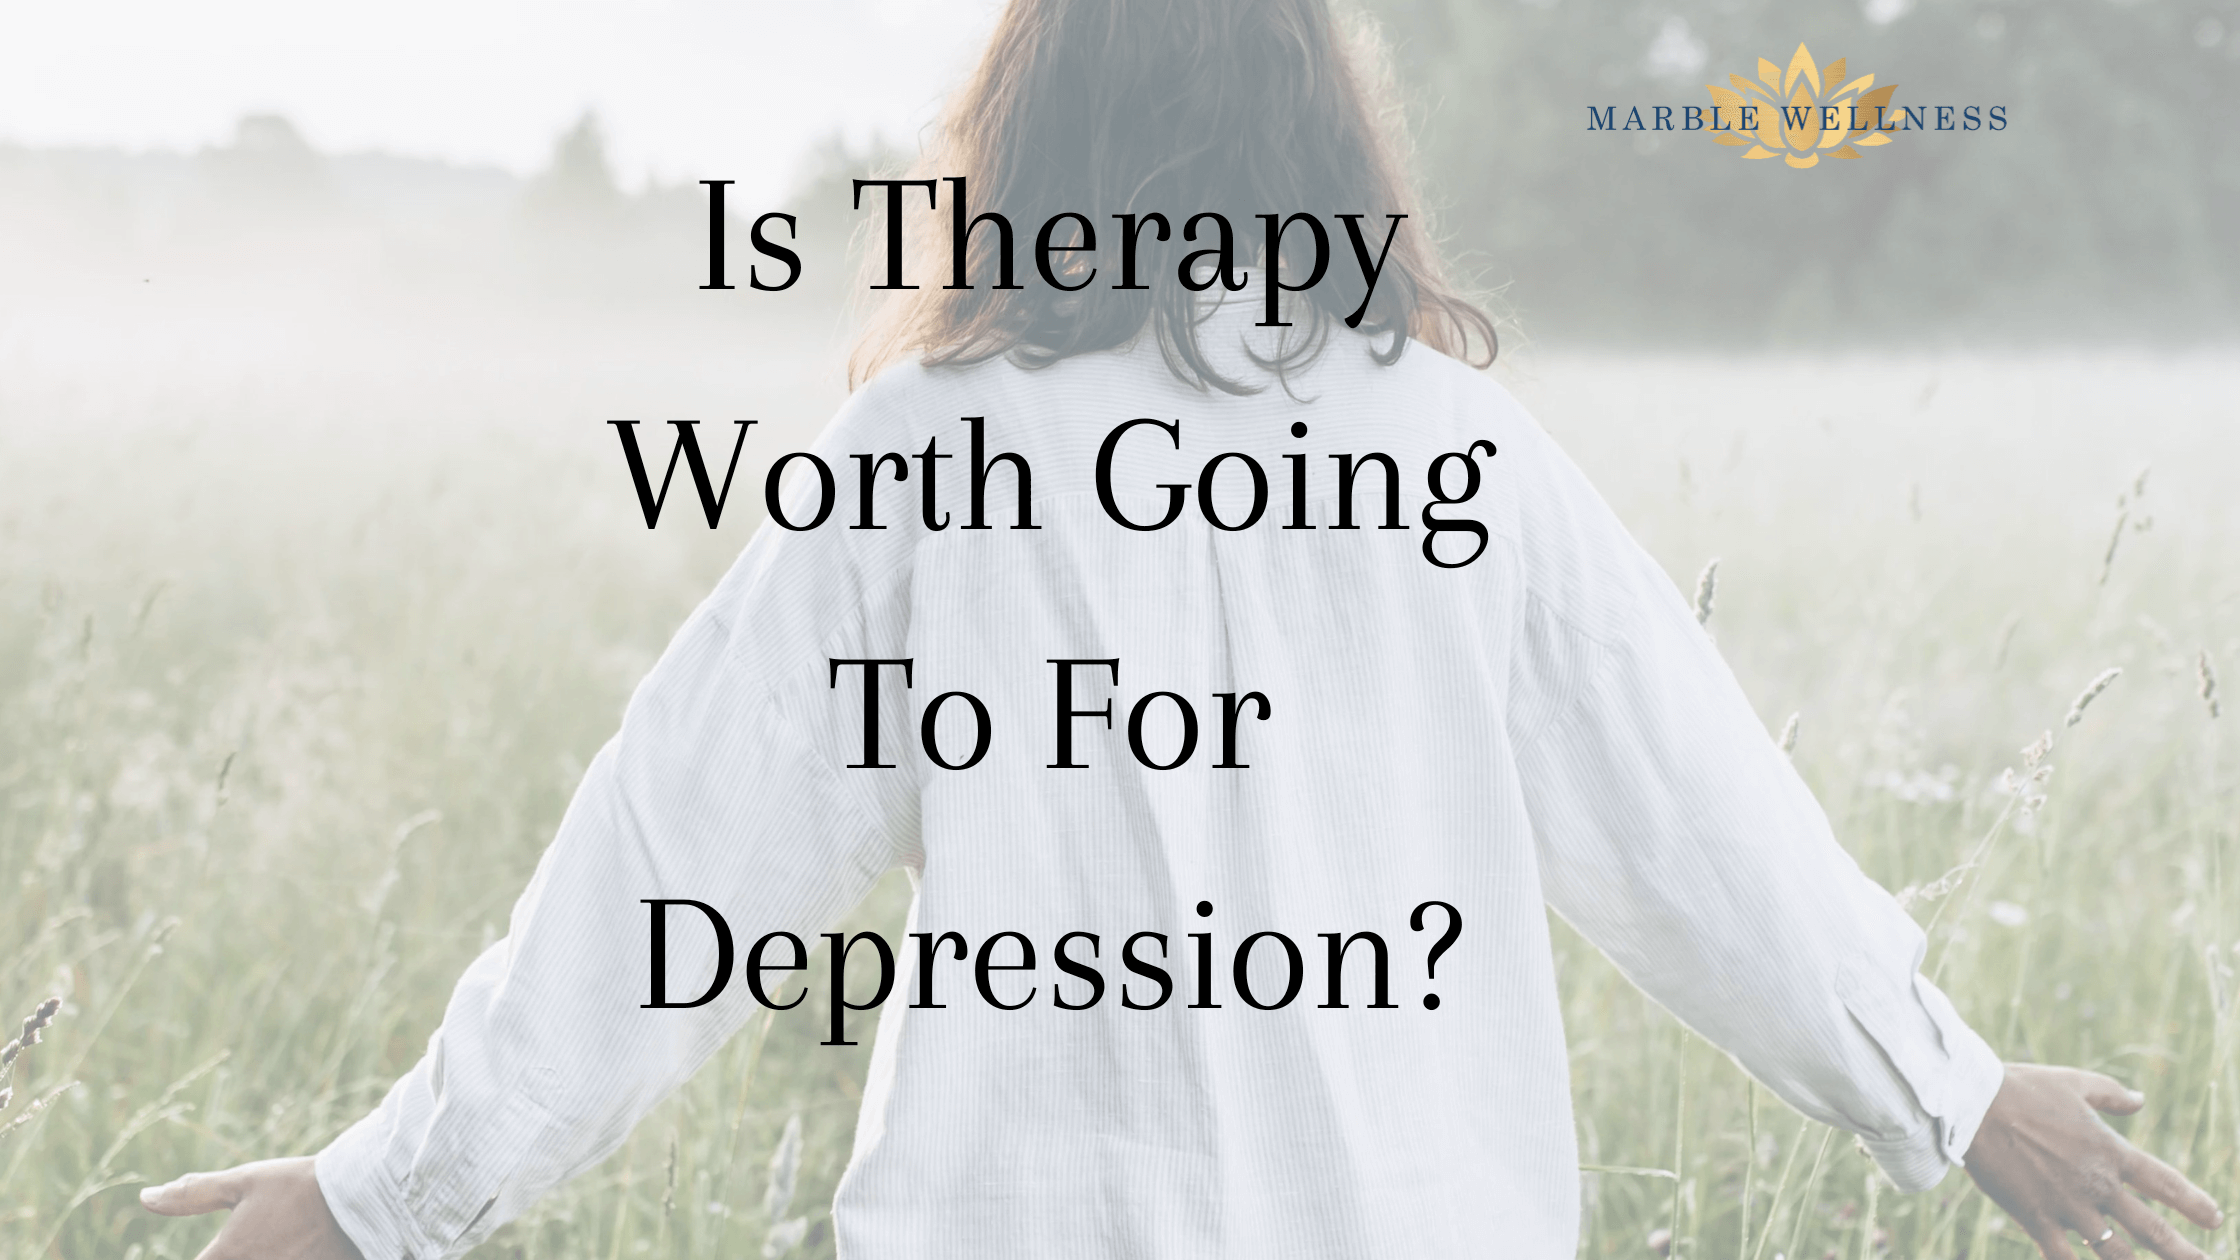 Is Therapy Worth Going to for Depression? Let’s Talk About It